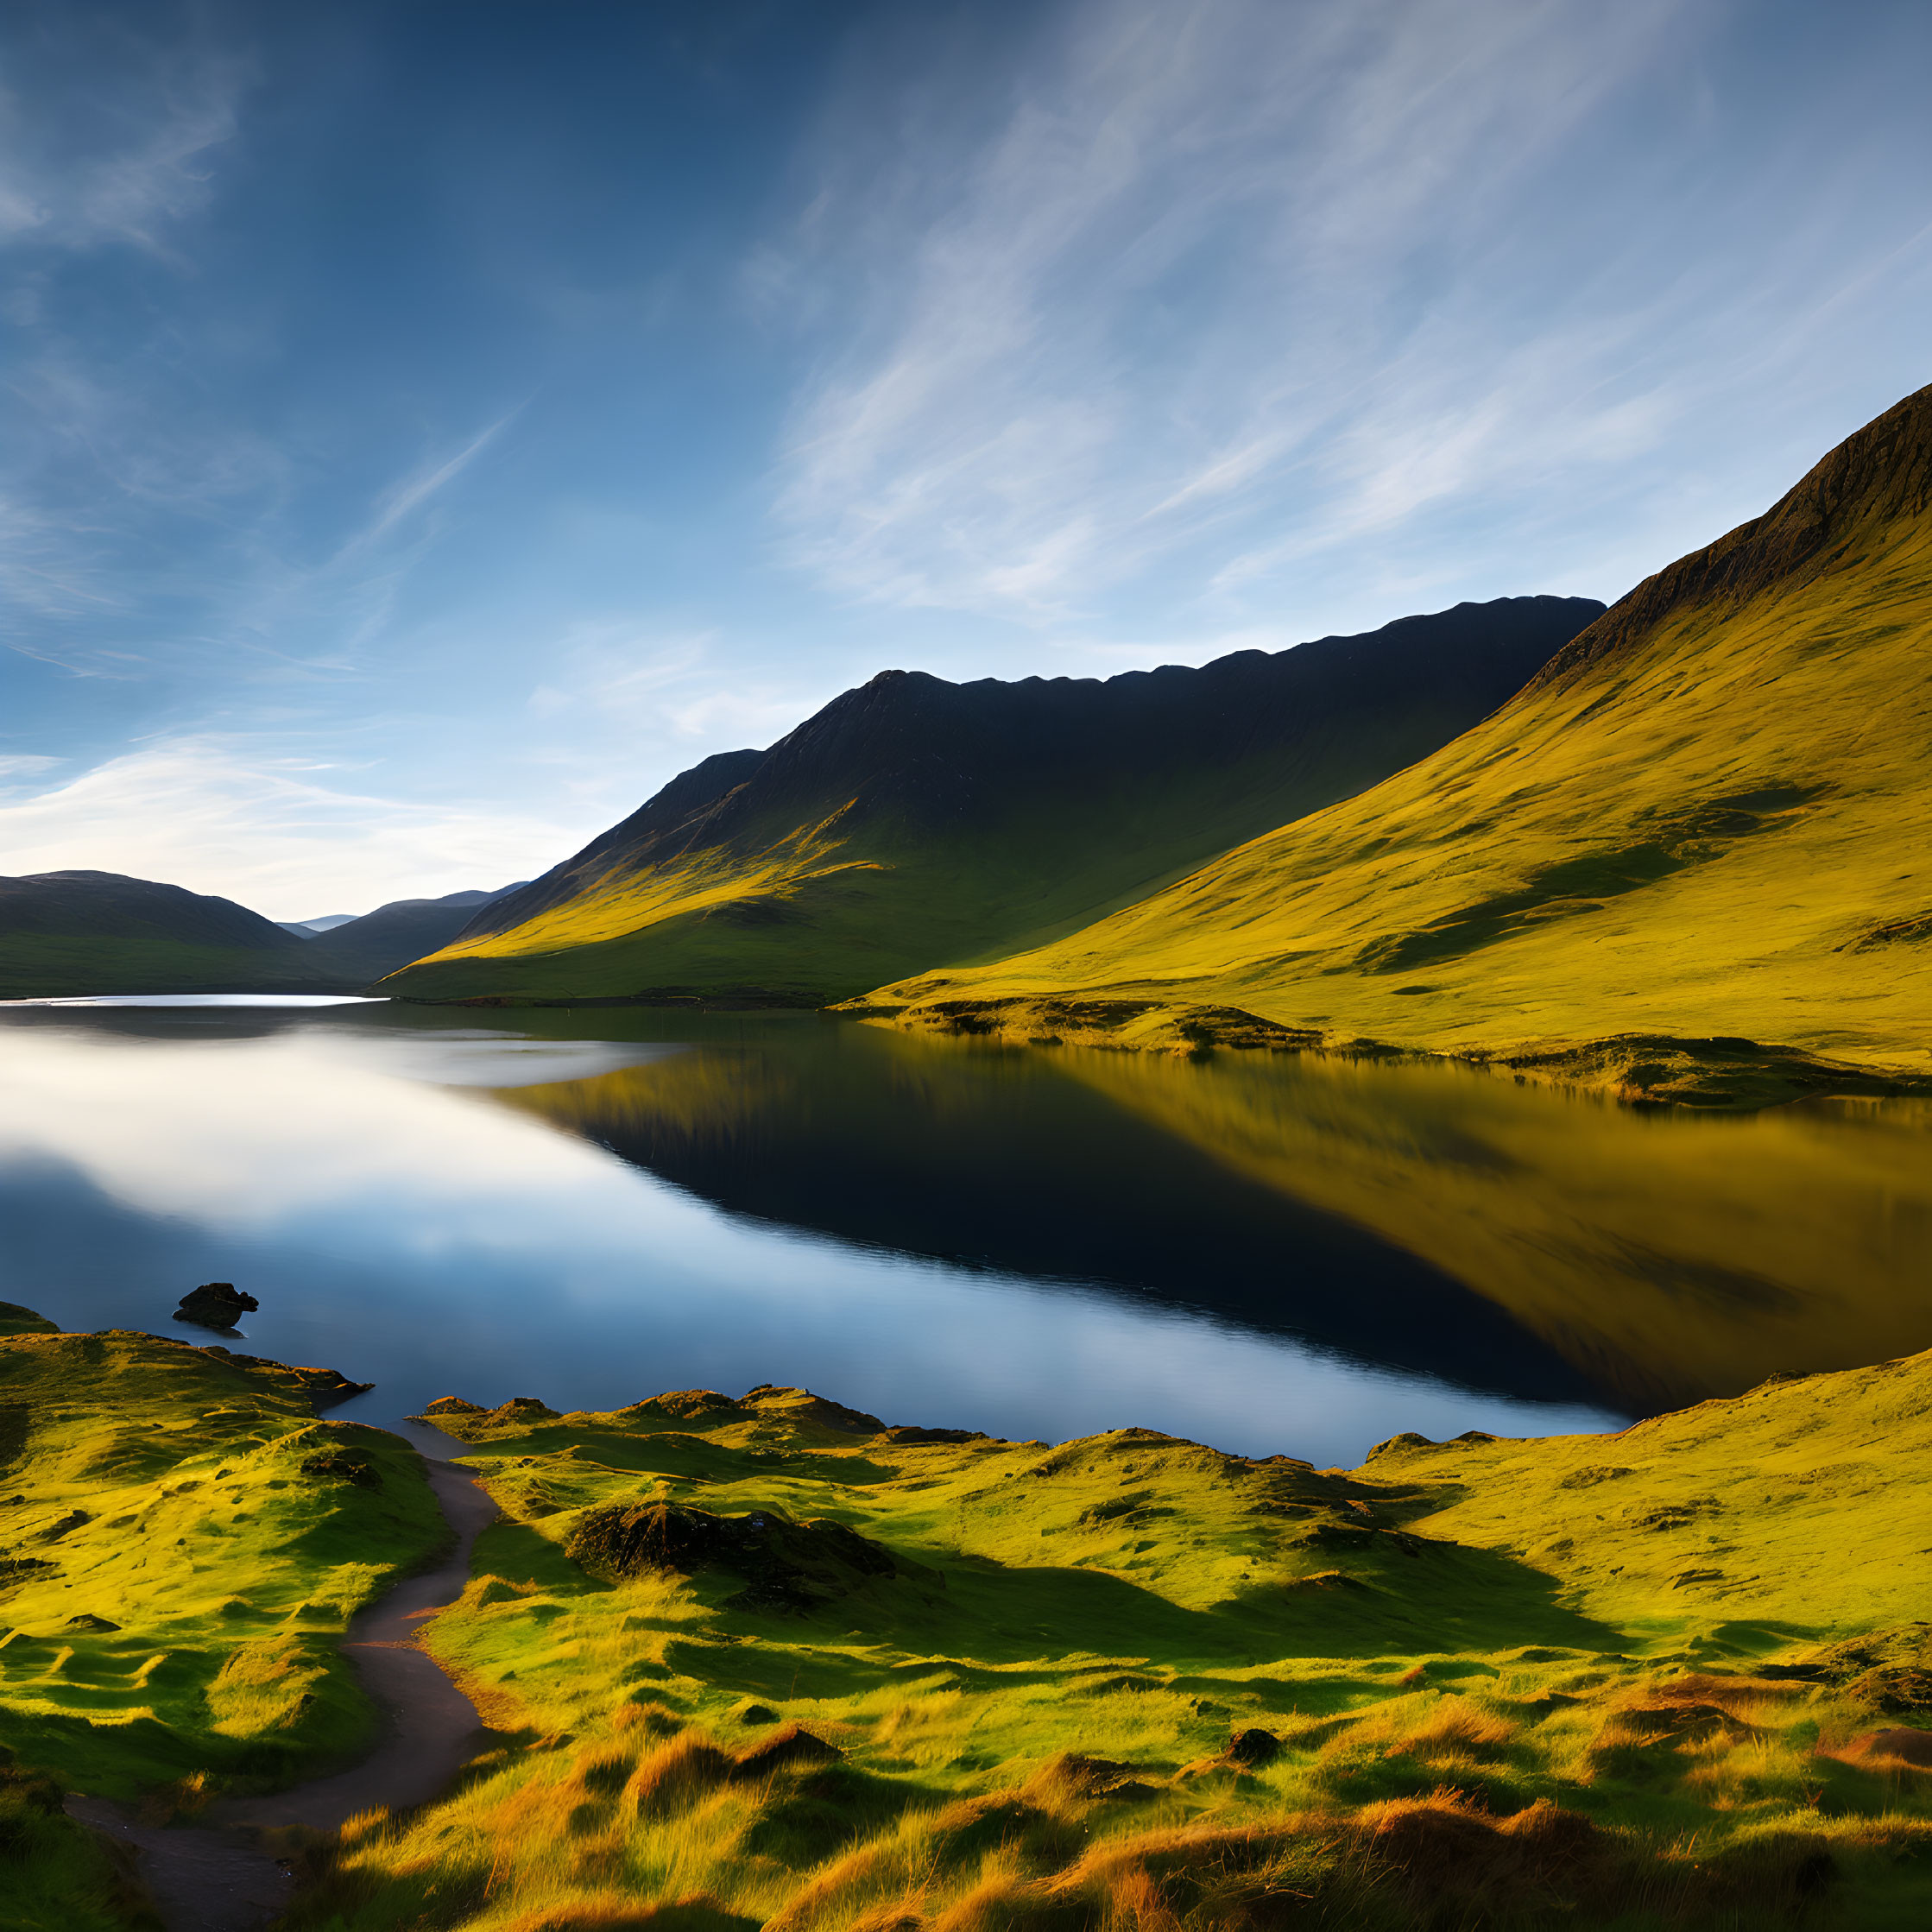 Tranquil lake reflecting grassy hills and cloudy sky with meandering path